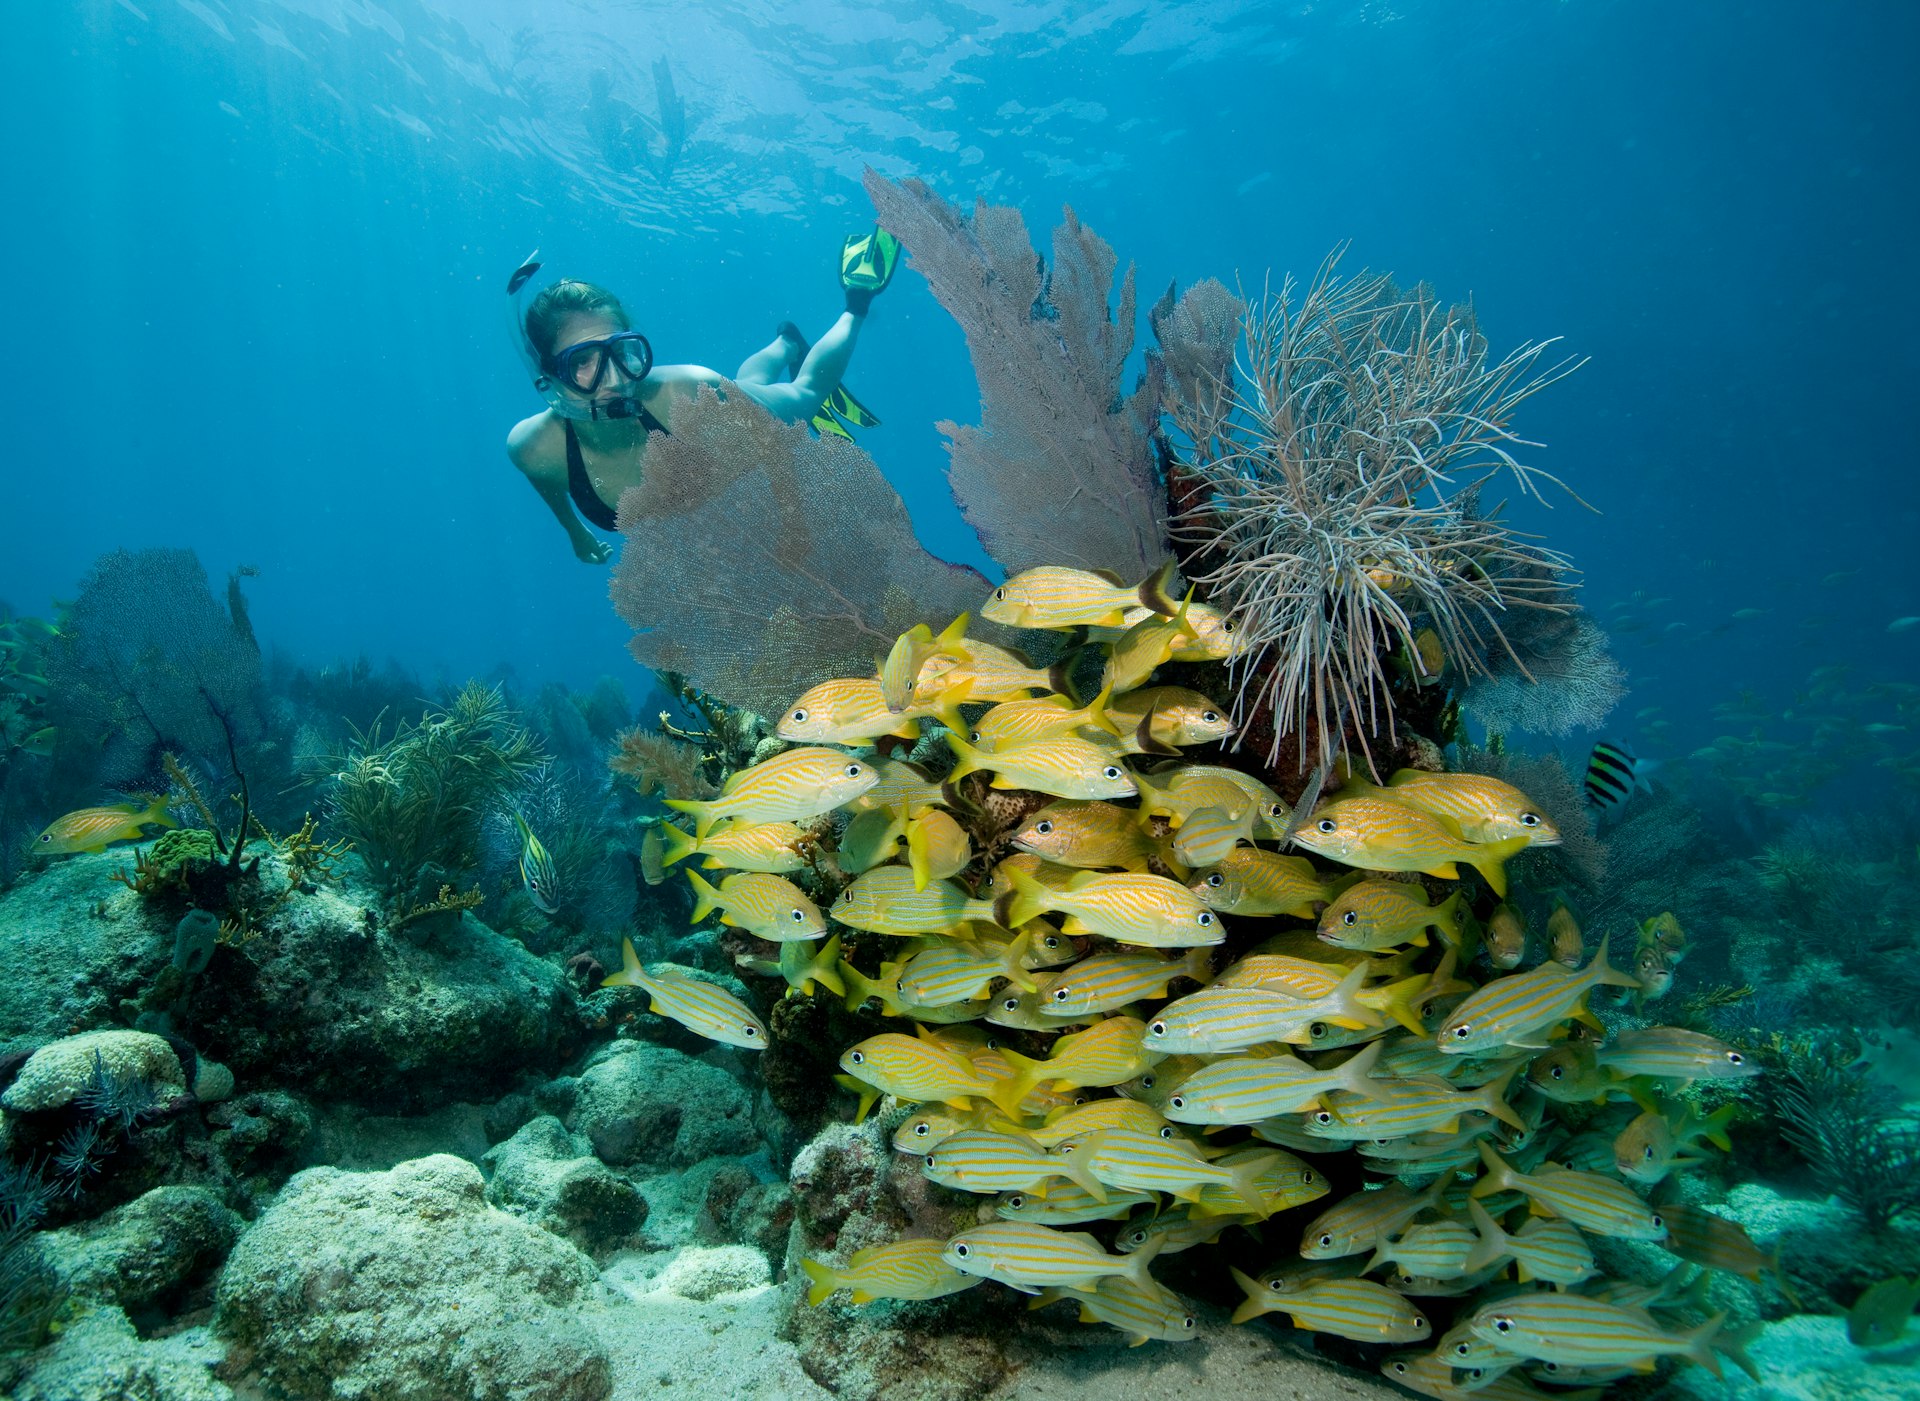 Female snorkeler explores a coral reef in Florida Keys National Marine Sanctuary.